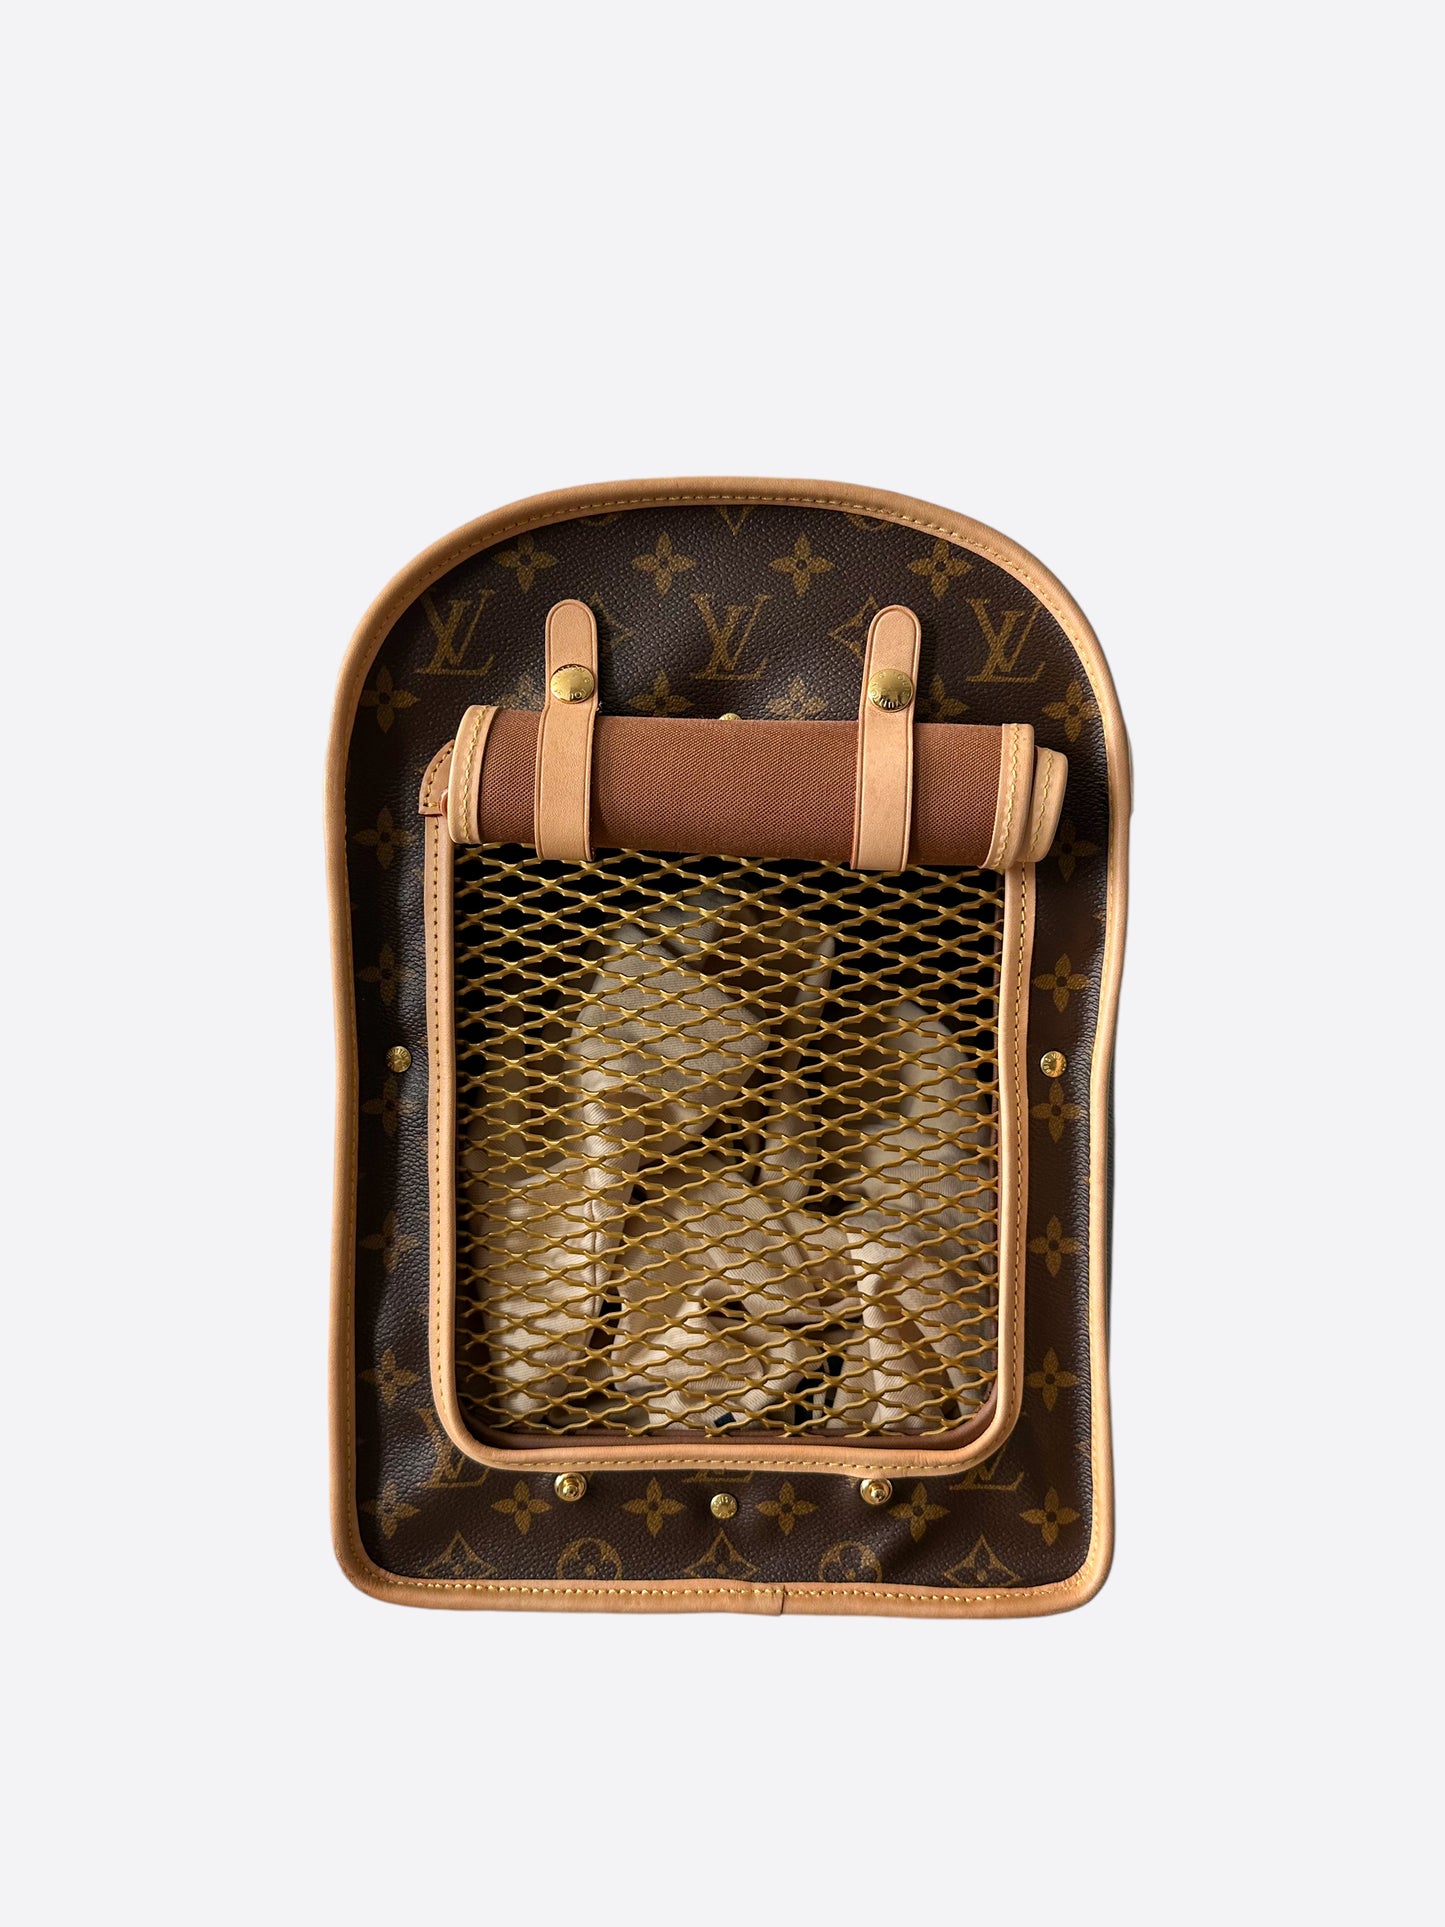 Pin by C.H. McCray on The Mrs.  Louis vuitton dog carrier, Louis